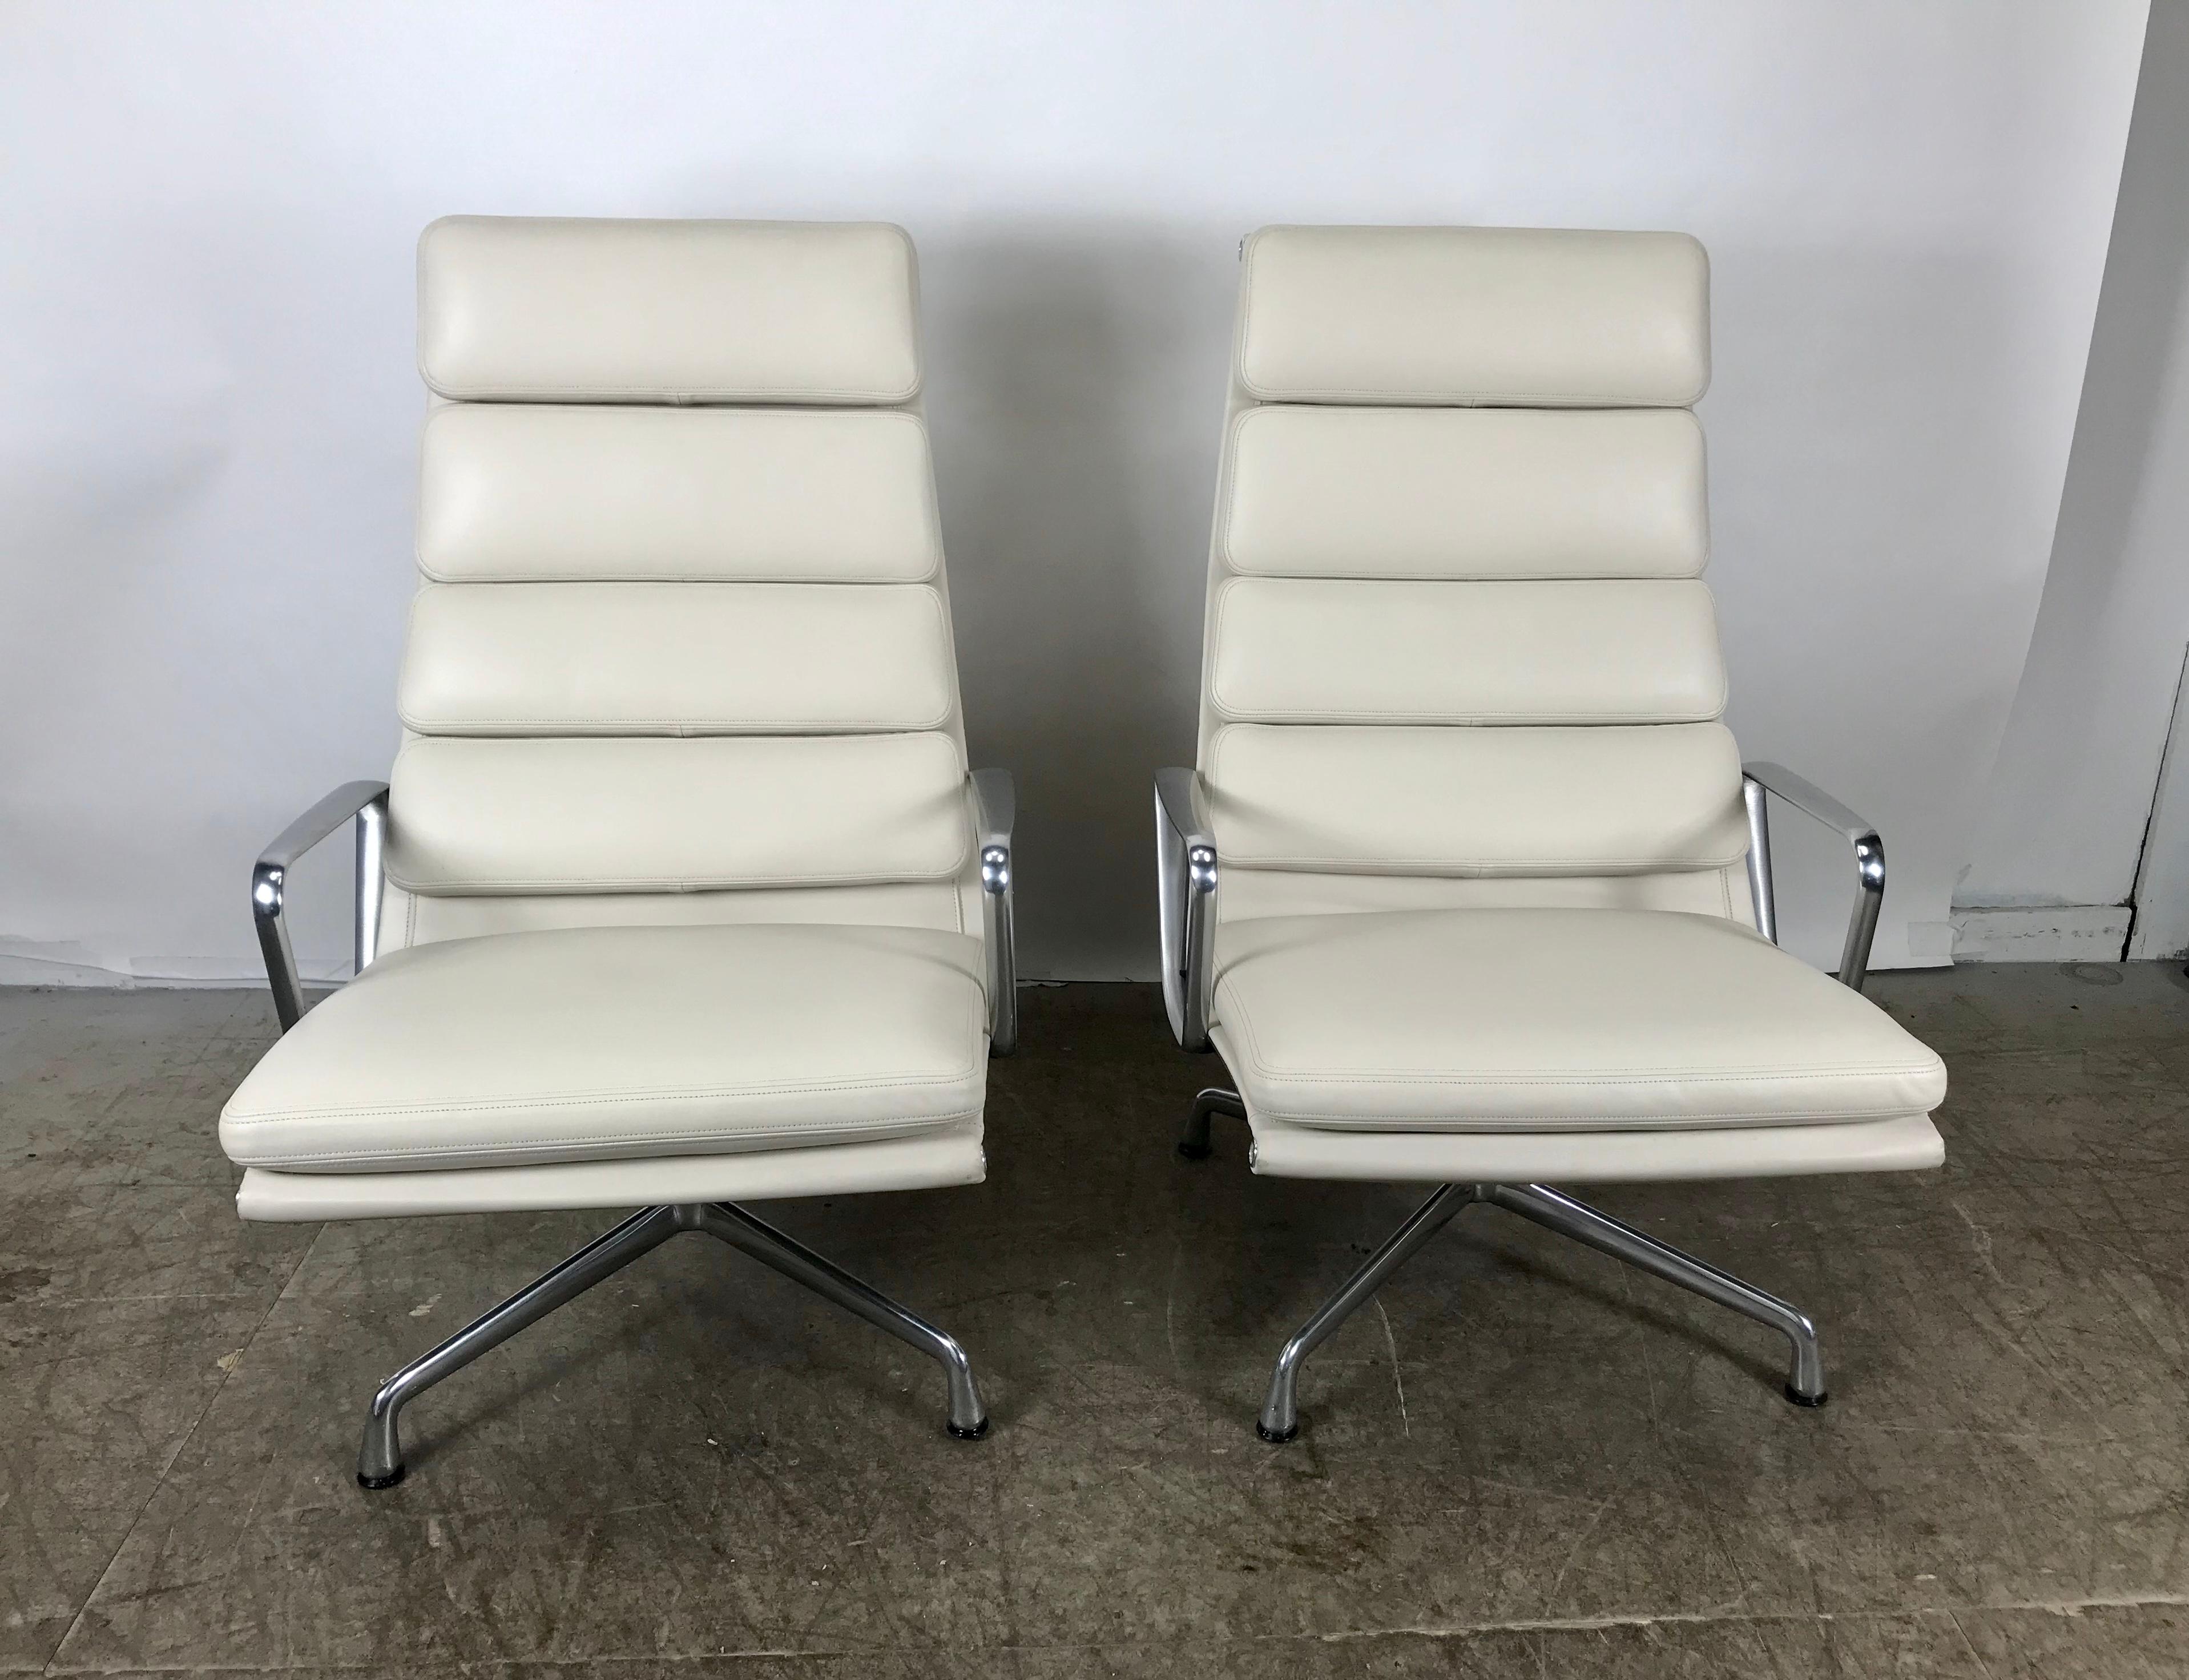 Leather and Aluminum Soft Pad Lounge Chairs, Charles Eames Herman Miller (amerikanisch)